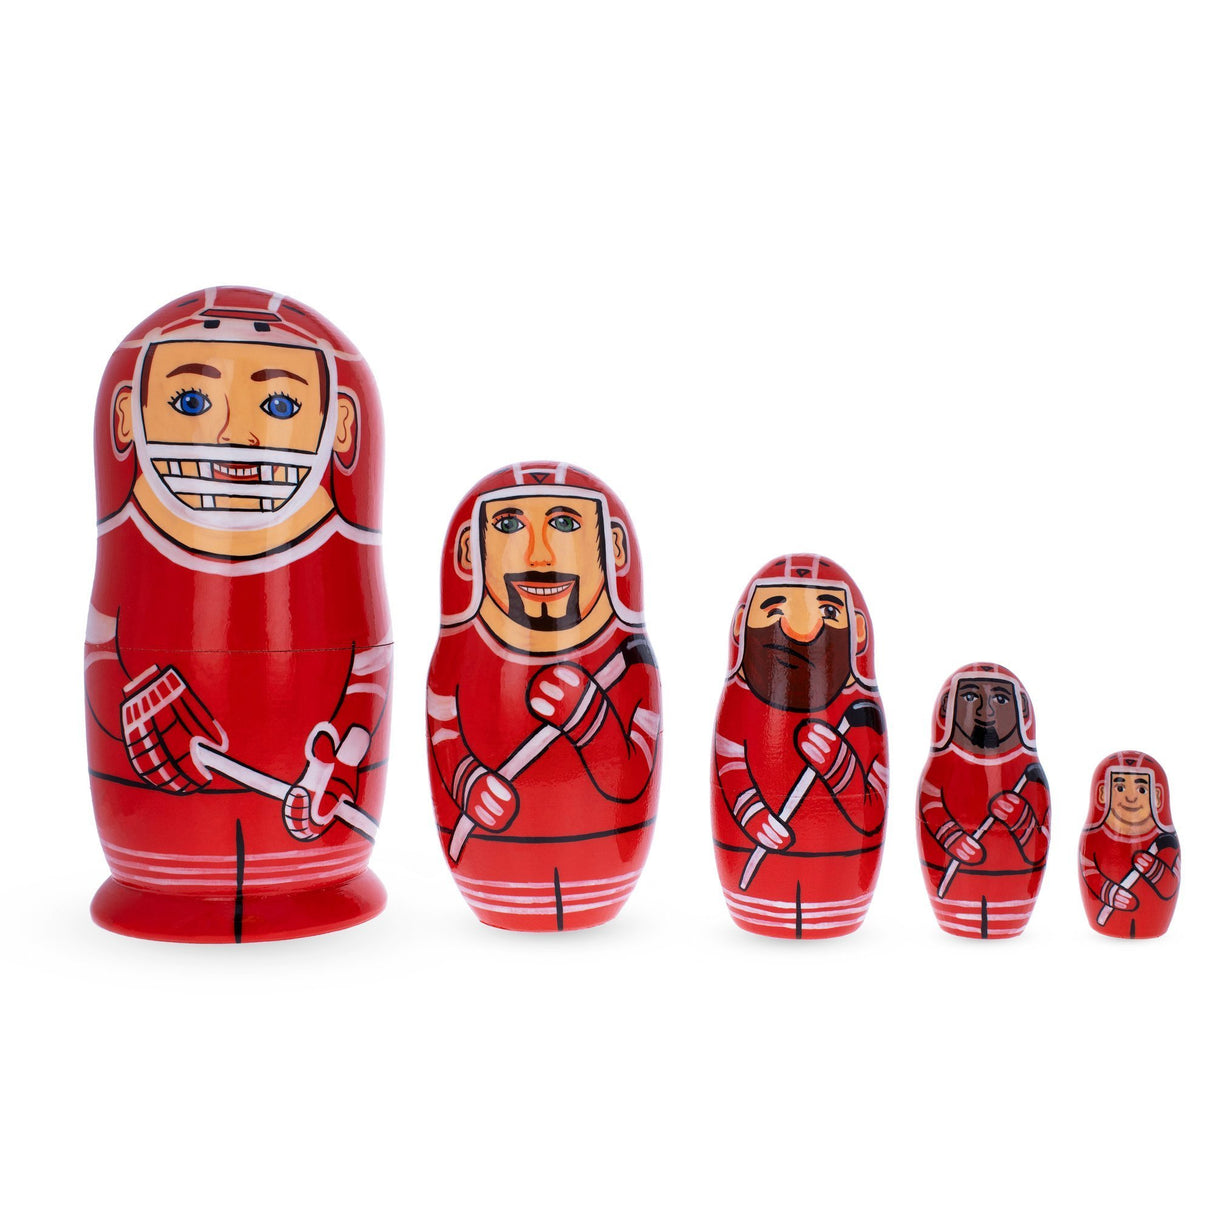 Wood Hockey Players Wooden Nesting Dolls in red color